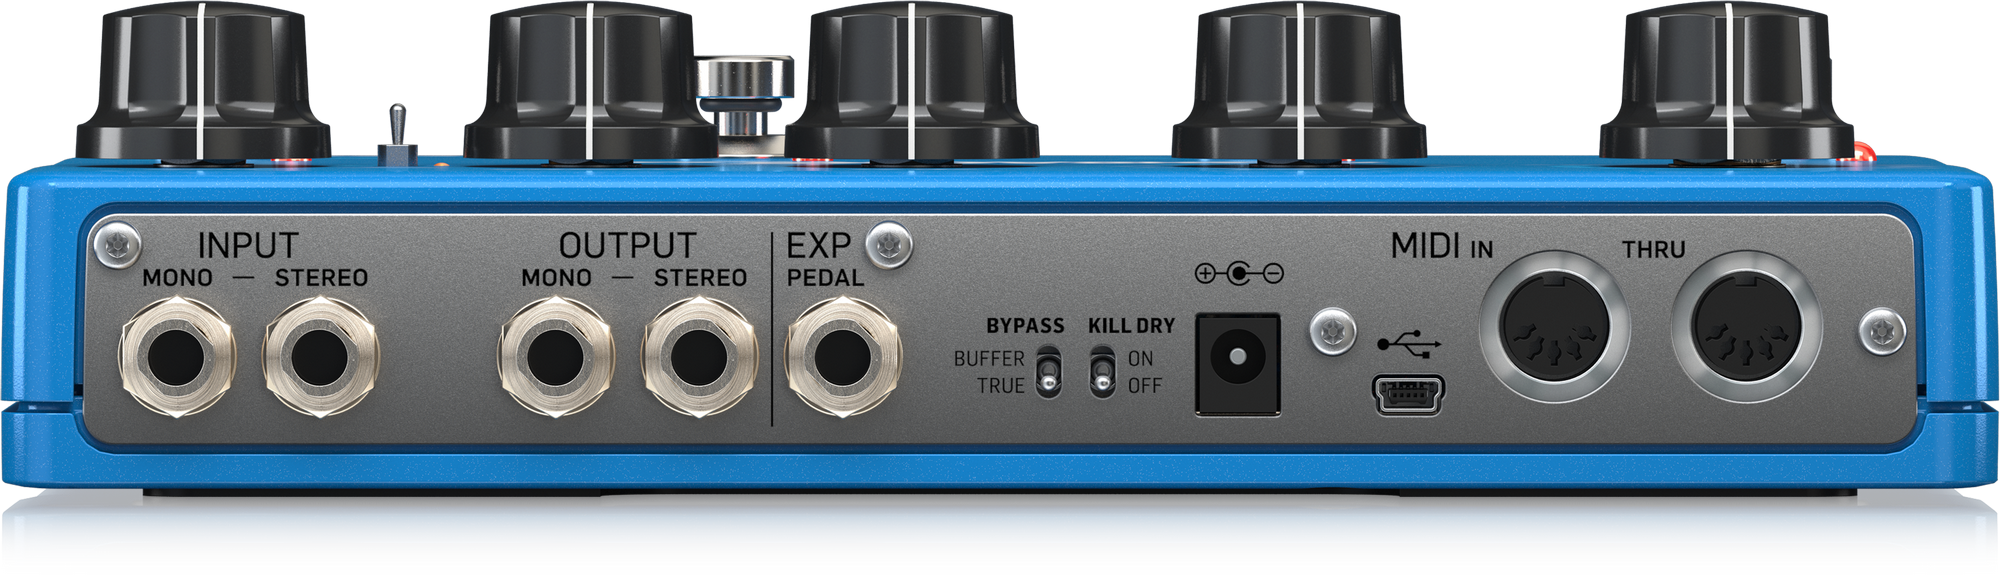 TC Electronic Flashback X4 Delay Pedal Exceptional TonePrint-Enabled Delay Pedal with 16 Delay Types, 3 Presets and Tap Tempo, TC ELECTRONIC, EFFECTS, tc-electronic-effects-tc-flashback-2-x4-delay, ZOSO MUSIC SDN BHD